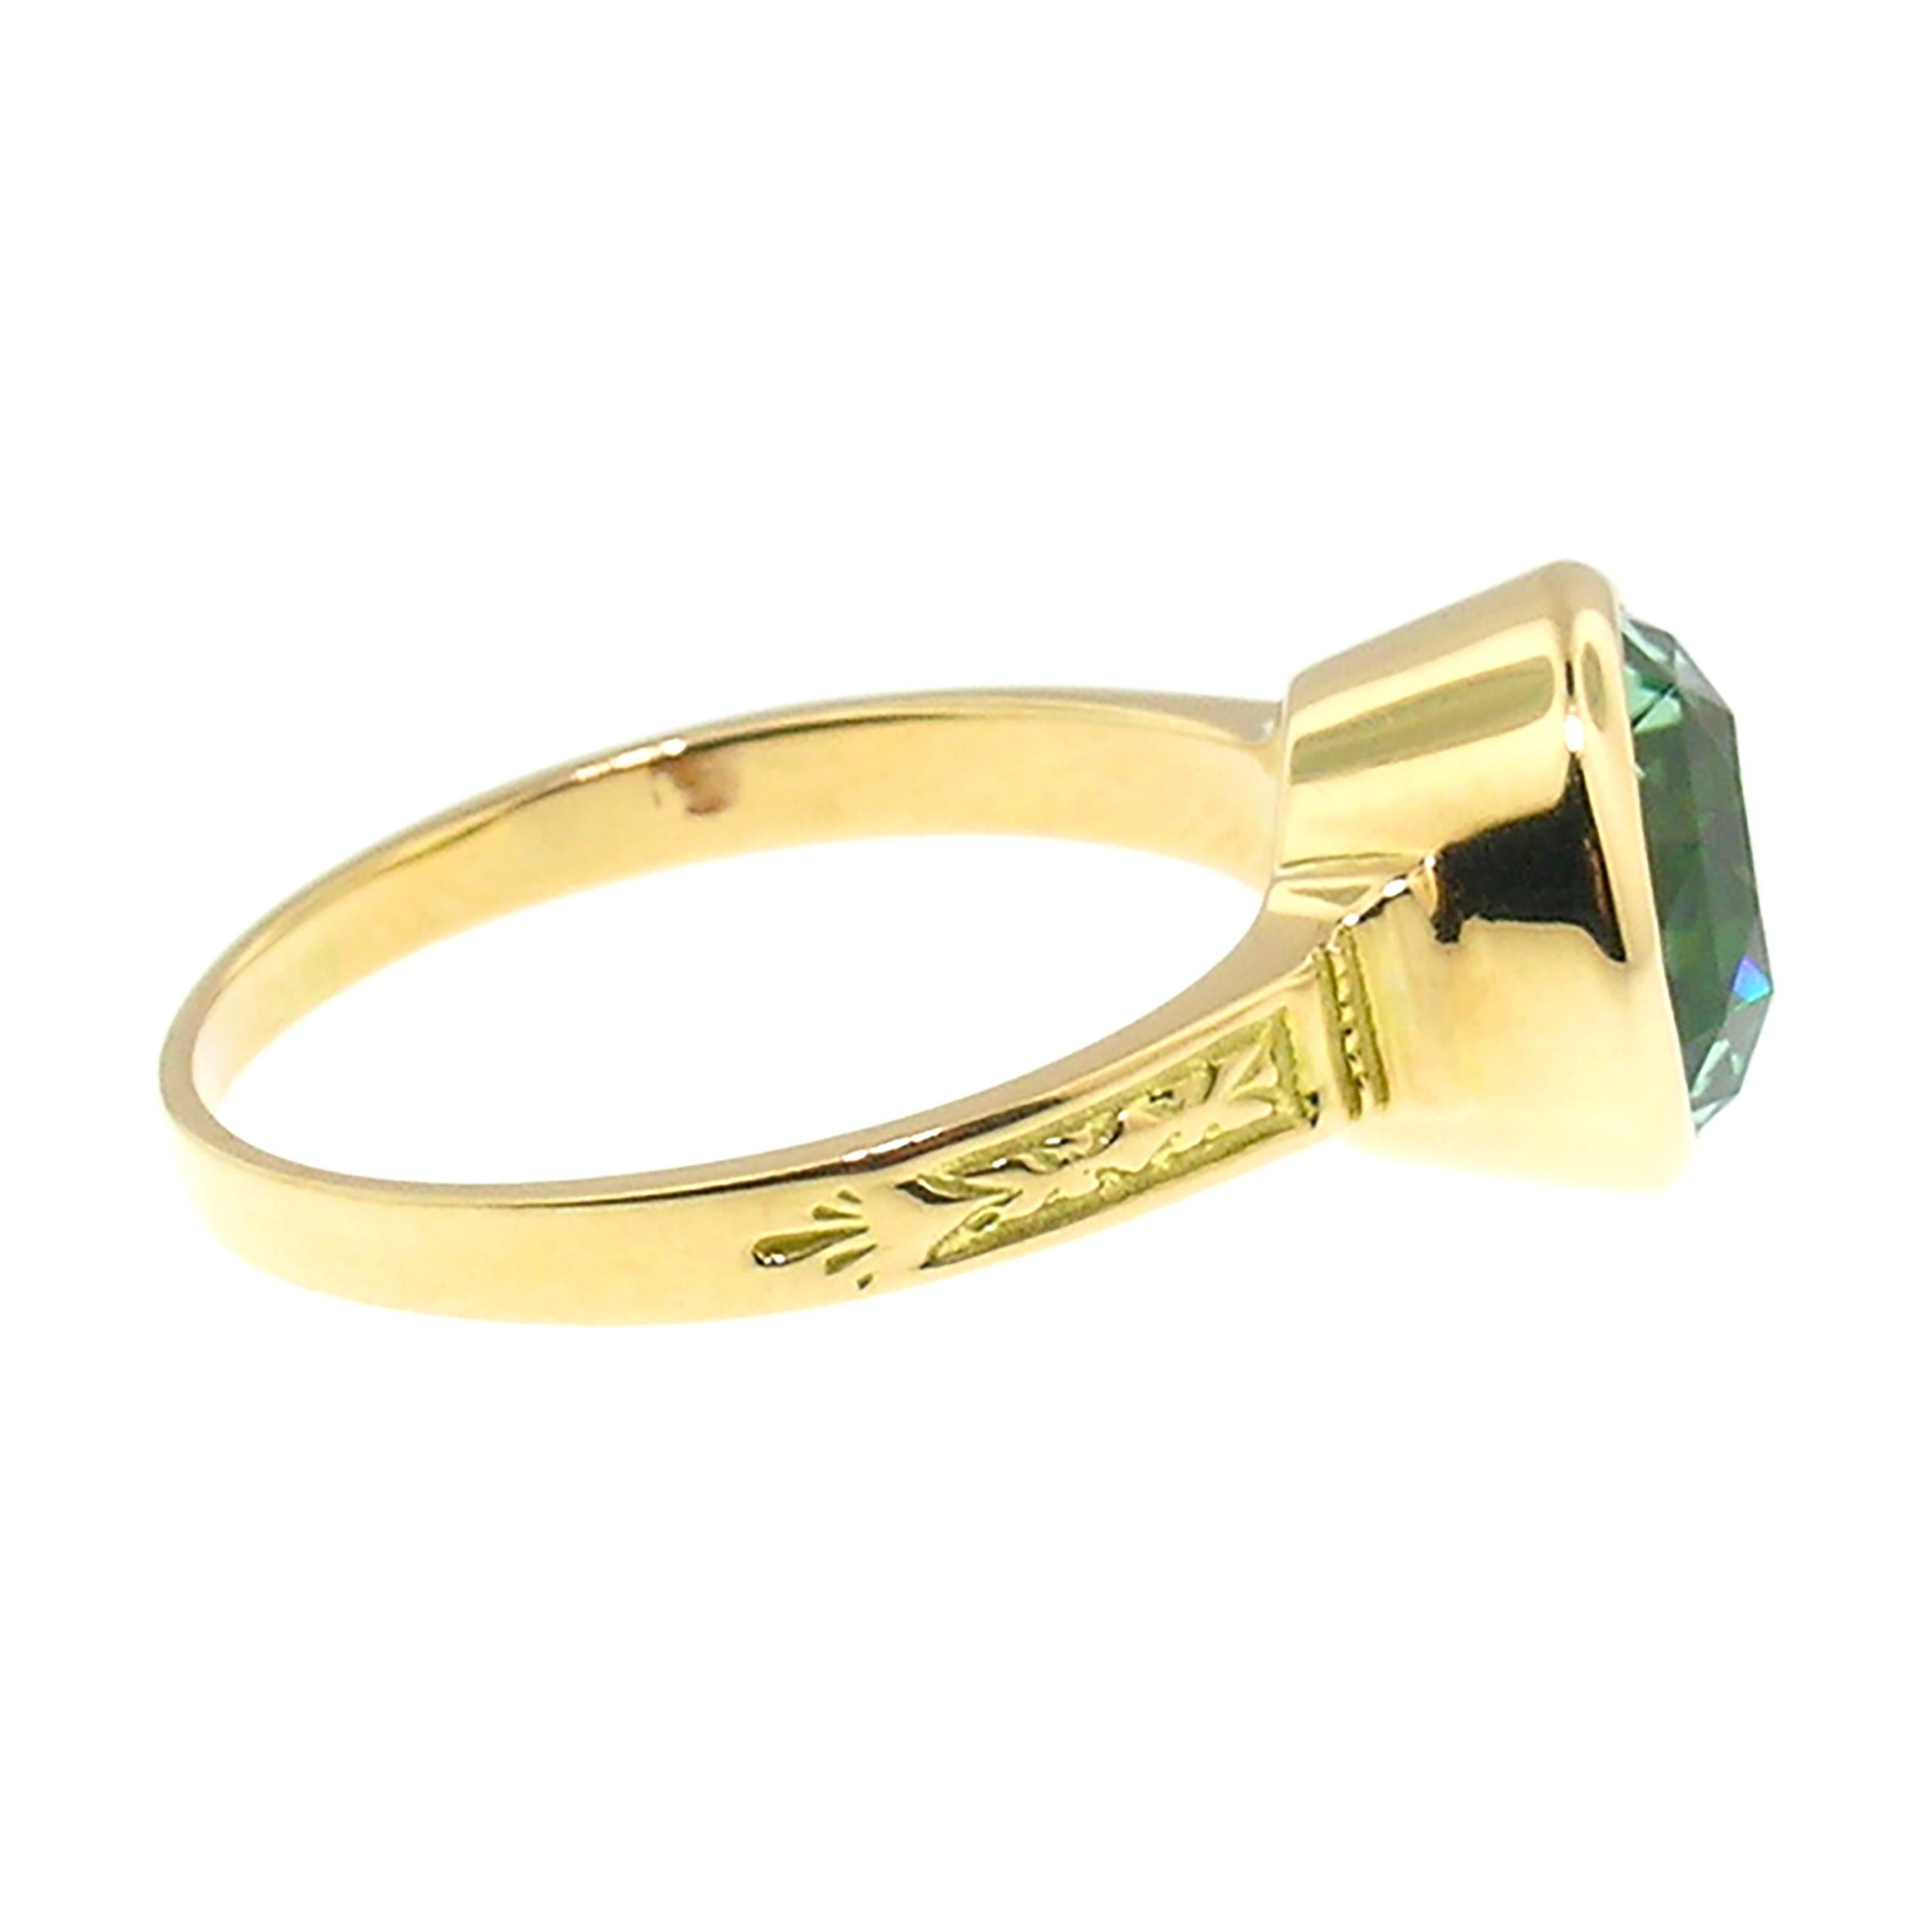 Round Cut 2.40ct Mint Green Tourmaline in 18kt Cassandra Ring by Cynthia Scott Jewelry For Sale